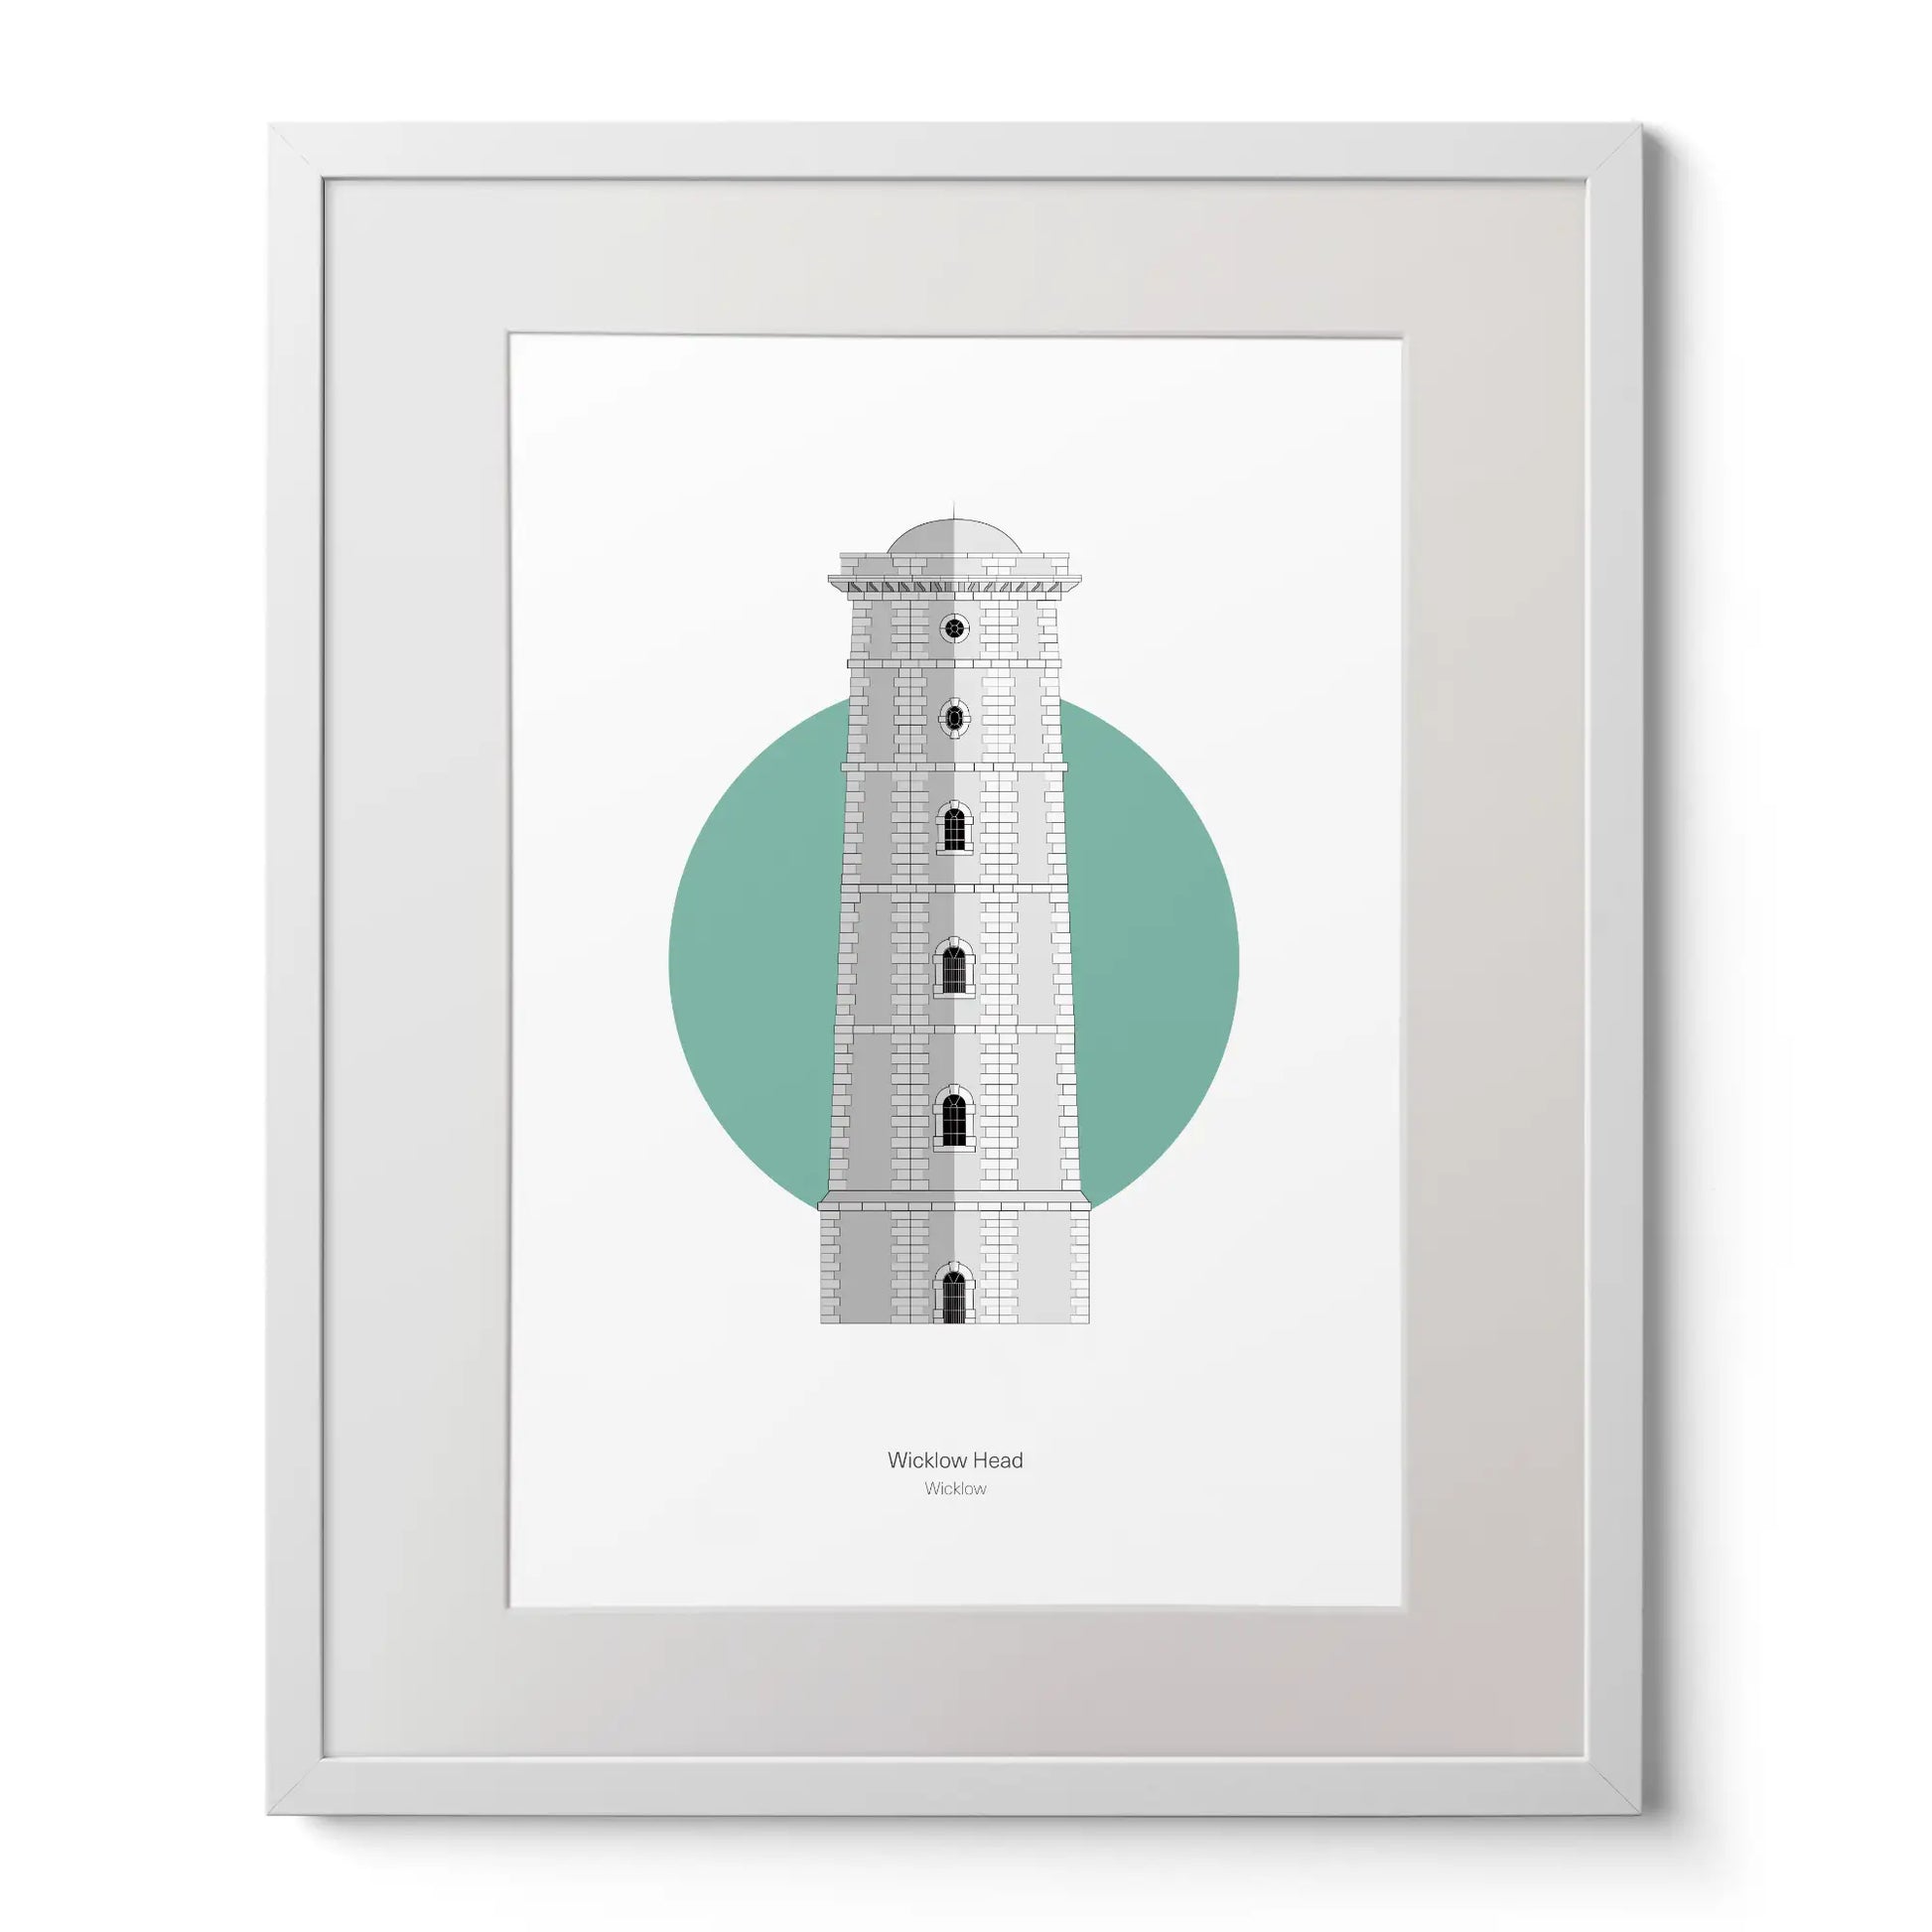 Illustration of Wicklow lighthouse on a white background inside light blue square,  in a white frame measuring 40x50cm.